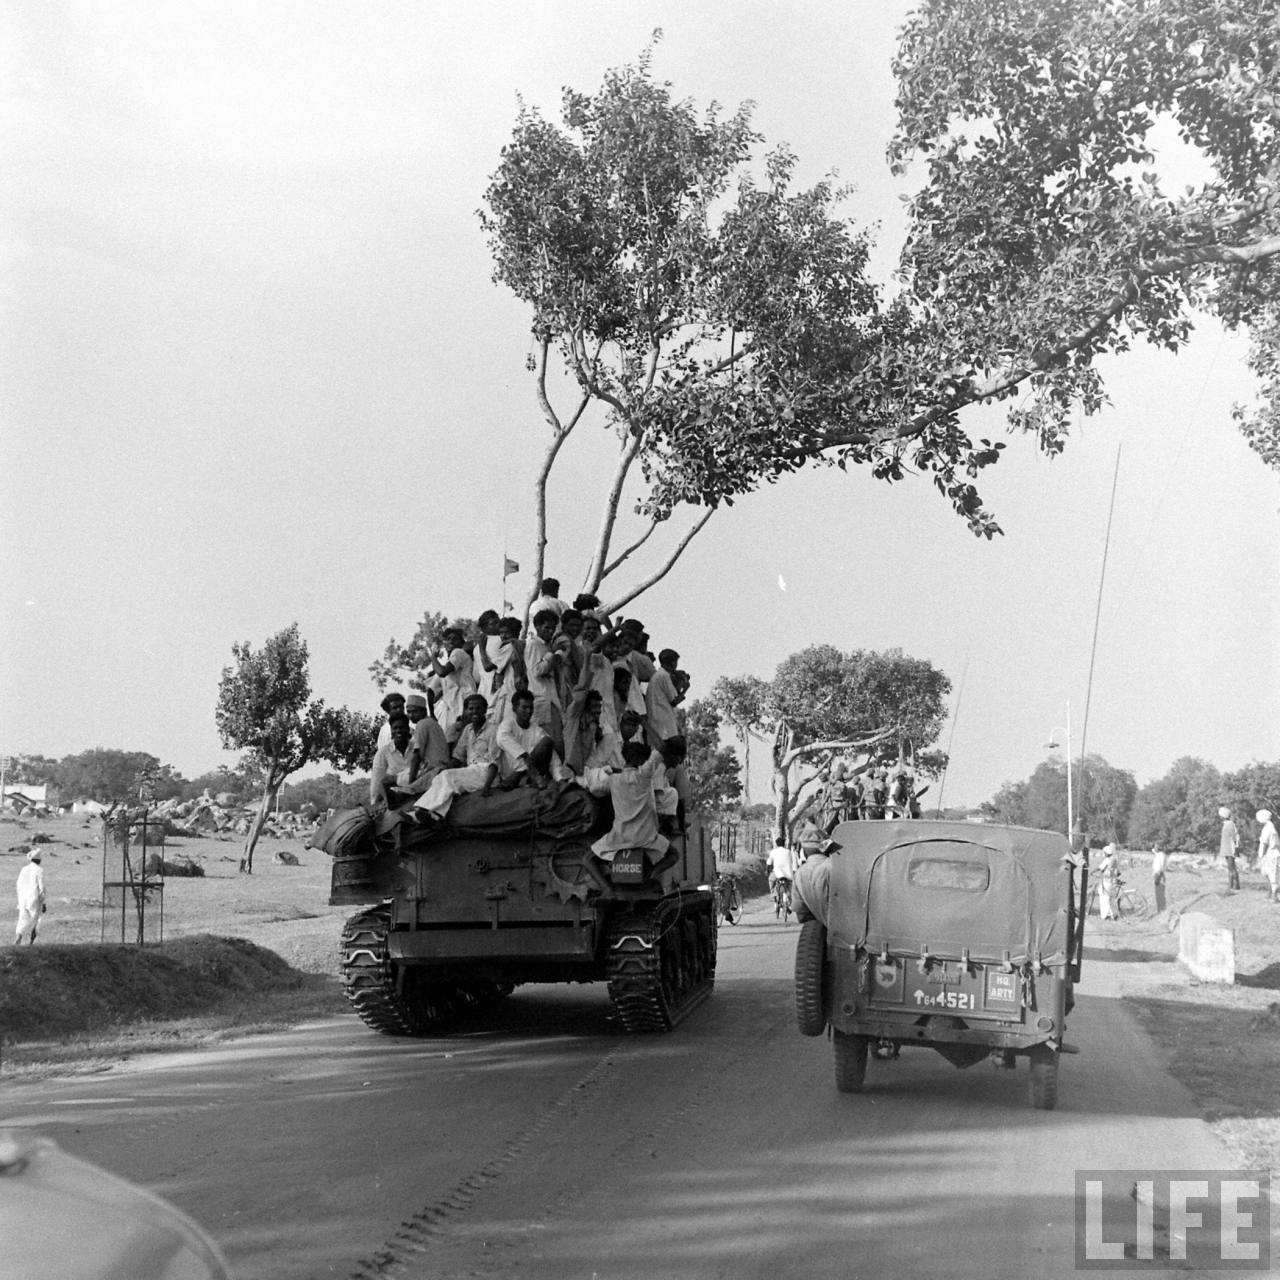 Operation Polo | Hyderabad Police Action | Annexation of Hyderabad, Hyderabad (Deccan), Telangana, India | Rare & Old Vintage Photos of Operation Polo, Hyderabad (Deccan), Telangana, India (1948)